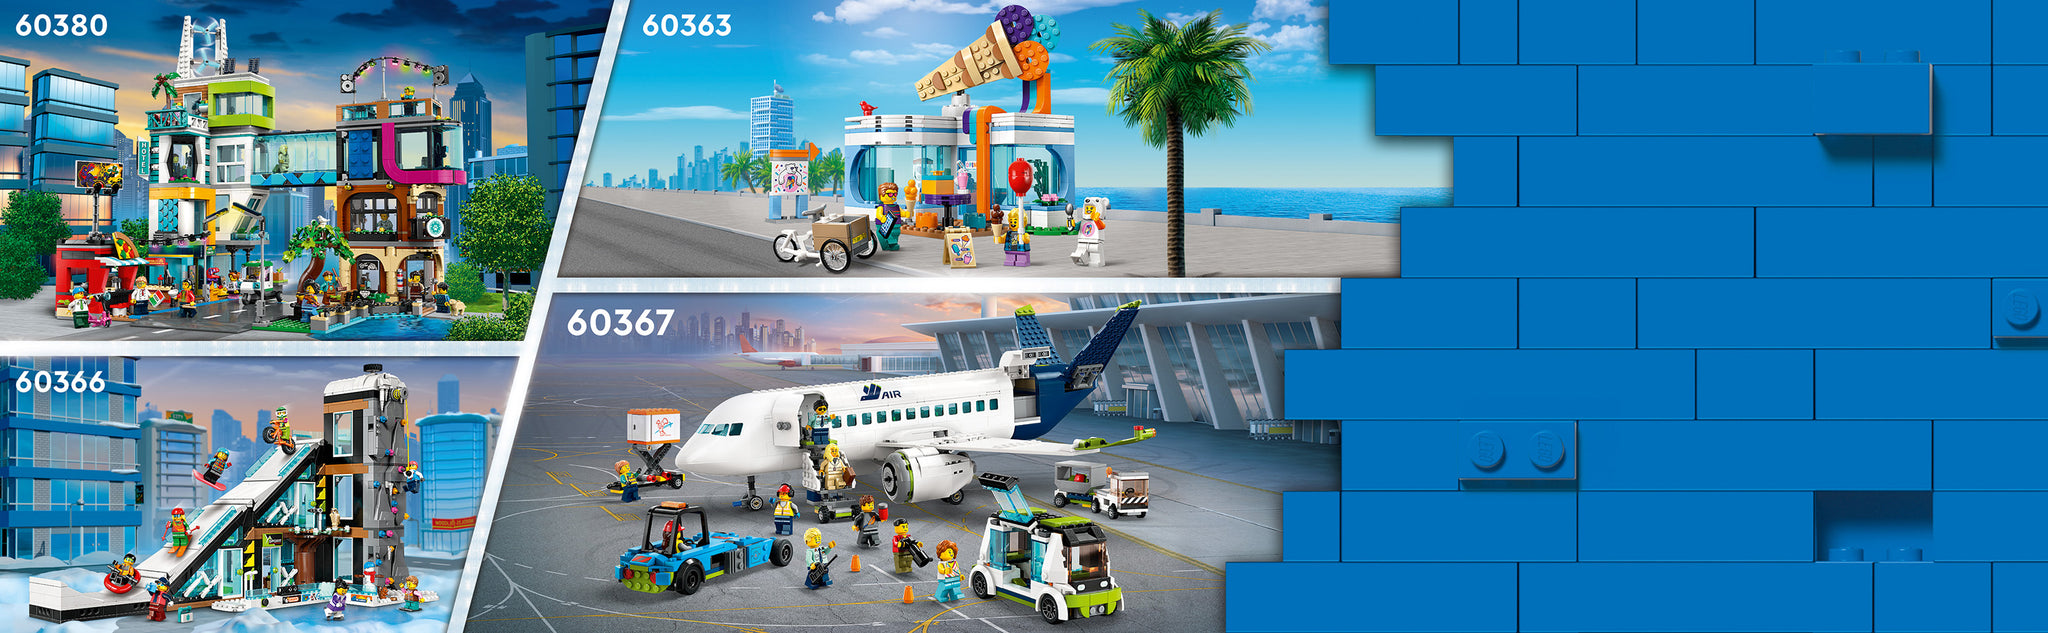 A treat for model airplane fans! This LEGO® City Passenger Plane (60367) set for children aged 7 and over is packed with realistic features. The plane has a detailed interior with a cockpit, seats, aisle and toilet and comes with an airstair, platform bus, tow truck, catering truck and luggage cart, plus 9 minifigures. Includes interactive building instructions This playset includes easy-to-follow printed building instructions and step-by-step 3D instructions in the LEGO Builder app. Here, children can zoom in, rotate models and view them from all angles while building. They can also track construction progress and save virtual playsets in the app. Awesome LEGO City vehicles Children see interesting vehicles and machines all around them. With LEGO City building sets, they can explore it up close with realistic models and fun characters that inspire limitless imaginative play. Model airplane and ground vehicle building and play set – LEGO® City Passenger Airplane (60367) set with realistic details and features What's in the box? – This playset includes everything kids need to build a passenger plane, skystairs, platform bus, tow truck, catering truck and luggage cart, plus 9 minifigures Features and functions – Kids can drive the catering truck to load supplies and open the roof of the aircraft is removable for access to the detailed cockpit, seats, aisle, lavatory and catering area A treat for toy airplane fans – a great birthday gift for kids aged 7 and up and a great holiday gift Plenty of room to play – the passenger plane measures over 7” (19cm) high, 17” (47cm) long and 17” (44cm) wide Fun accessories for extra play fun – LEGO® minifigure accessories include a suitcase, camera, backpack, briefcase, walkie-talkie, 2 soda cans and 2 cups Interactive instructions for fun building experience – with the LEGO® Builder app for smartphones and tablets, children can zoom in on the models in this set and view them from all sides while building. Unlimited creative play – enjoy even more fun and adventures by combining this set with other sets from the LEGO® City range Quality guaranteed – all LEGO® parts meet strict industry standards, making them consistent, compatible and fun to build with Safety checked – LEGO® parts are dropped, heated, crushed, twisted and analyzed to ensure that they meet strict global safety standards